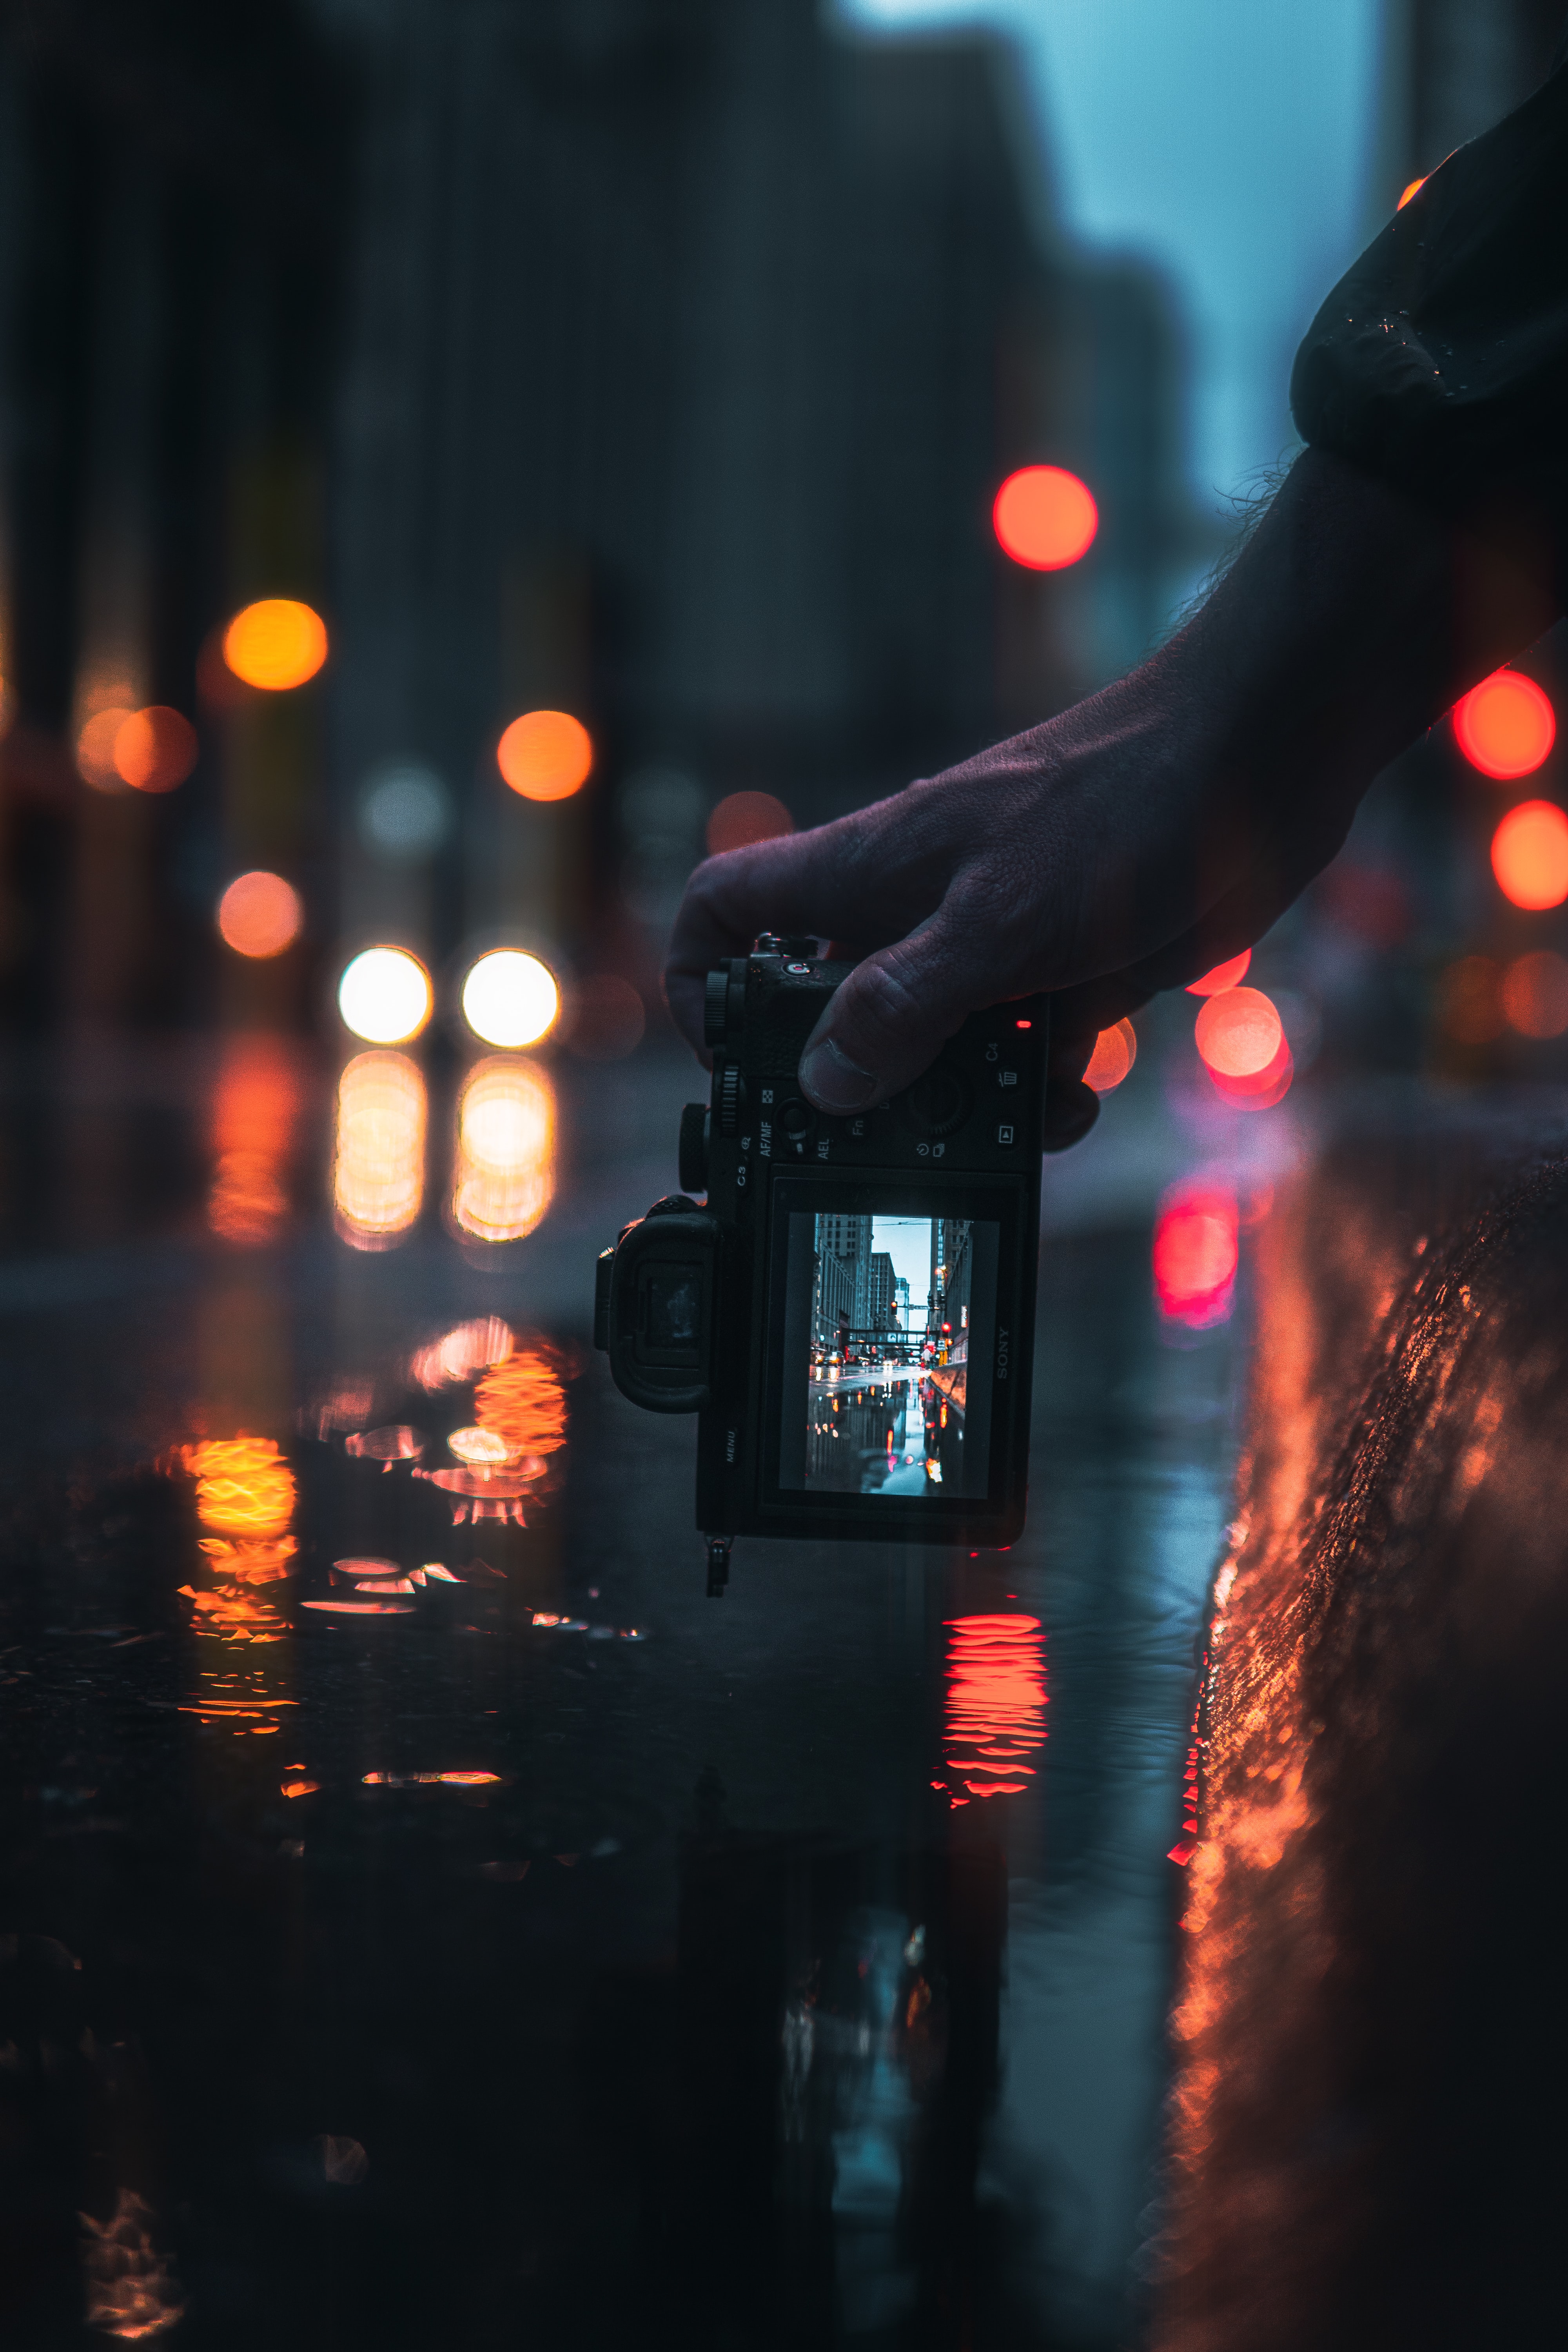 camera, shooting, neon, blur, hand, miscellanea, miscellaneous, smooth, survey wallpapers for tablet